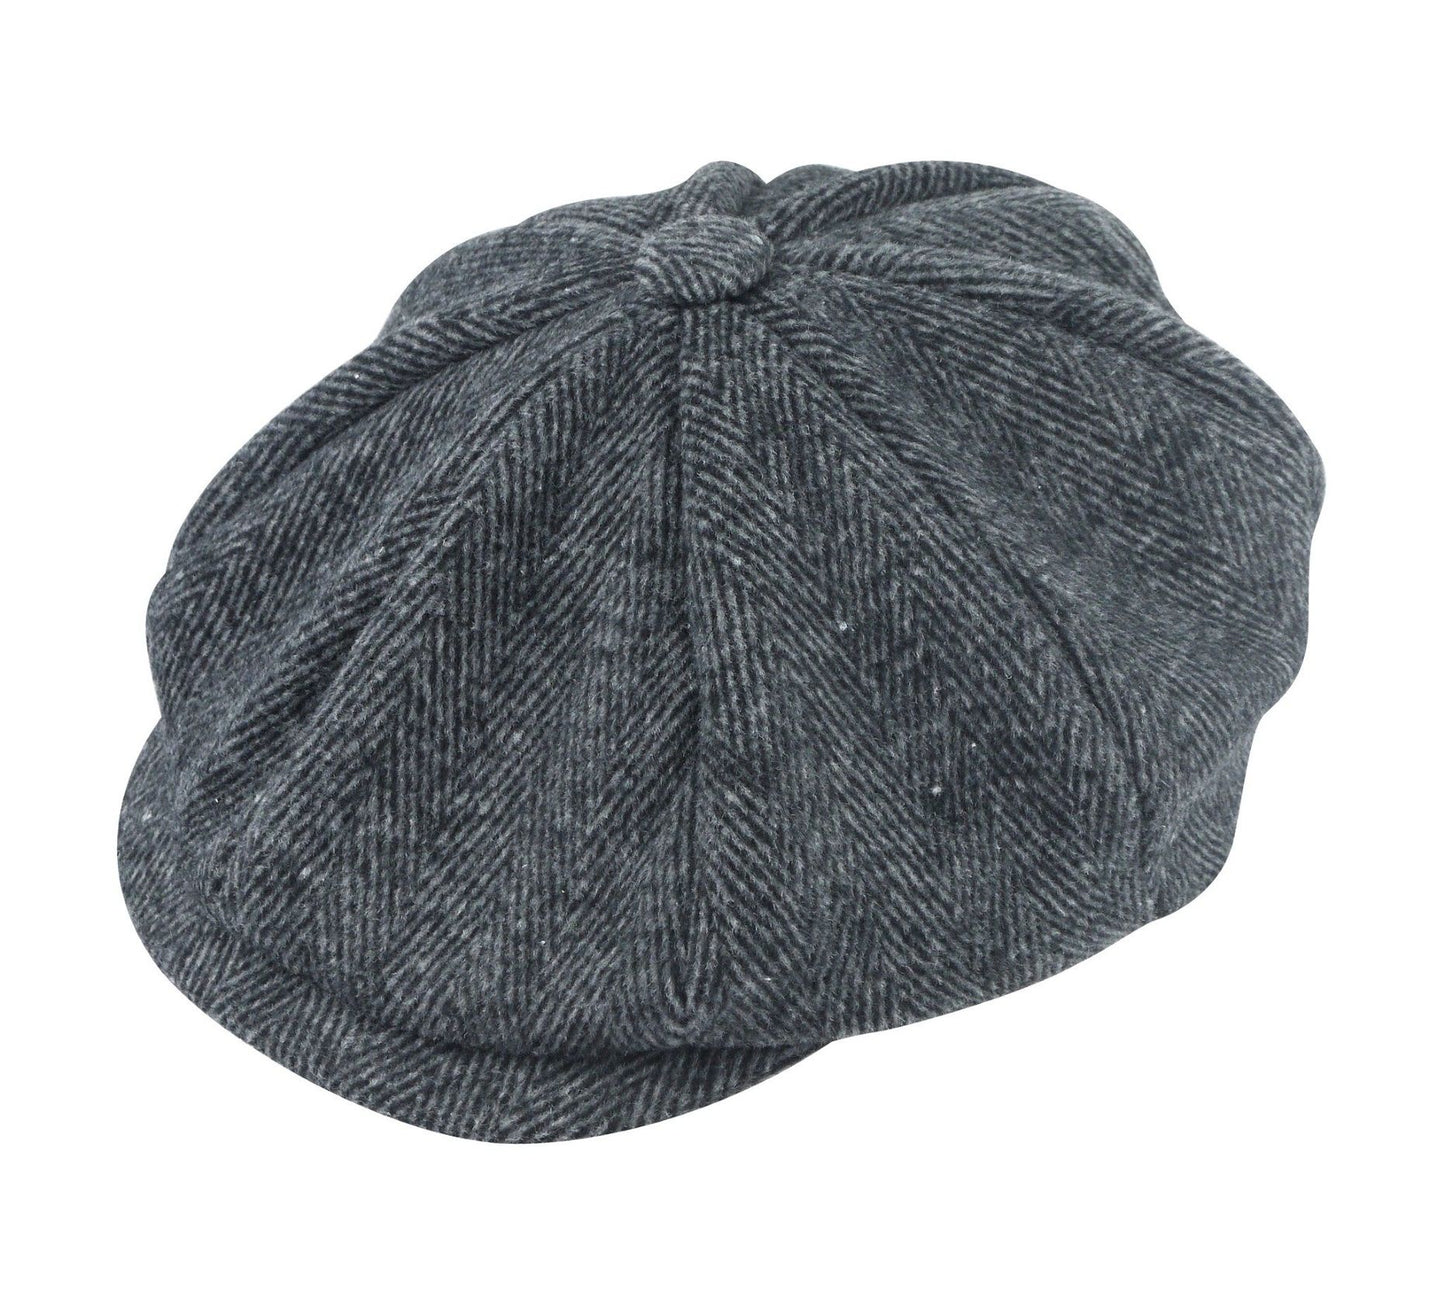 Casquette Plate à Chevrons - Style Peaky Blinders